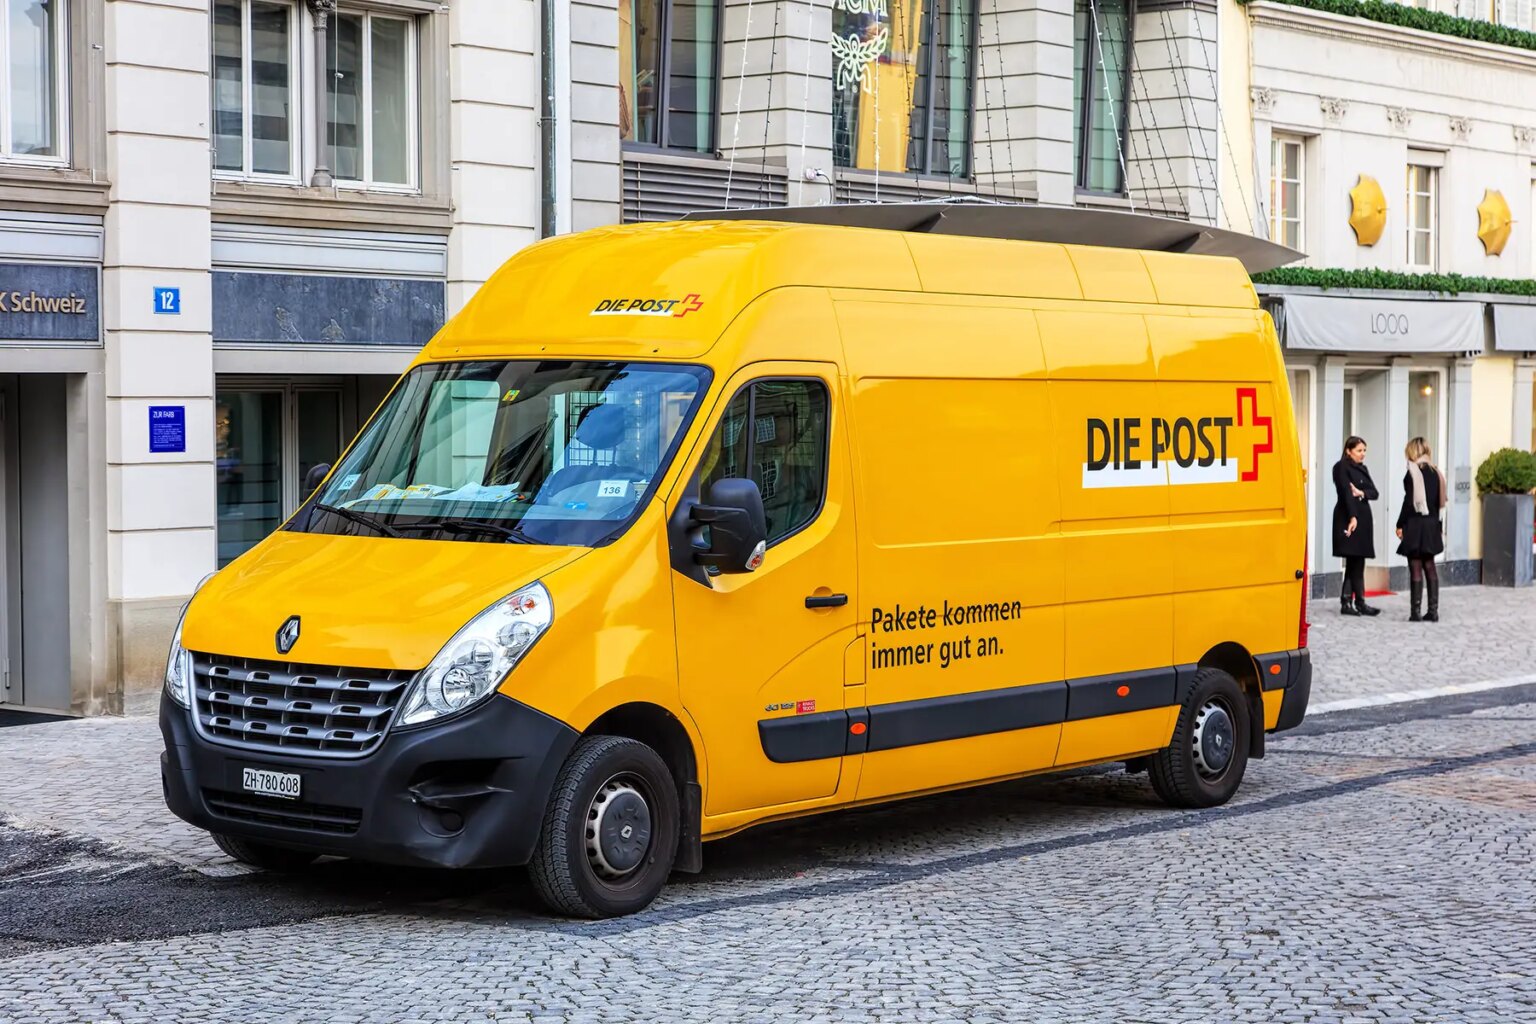 3 Things About The French Postal System: La Poste